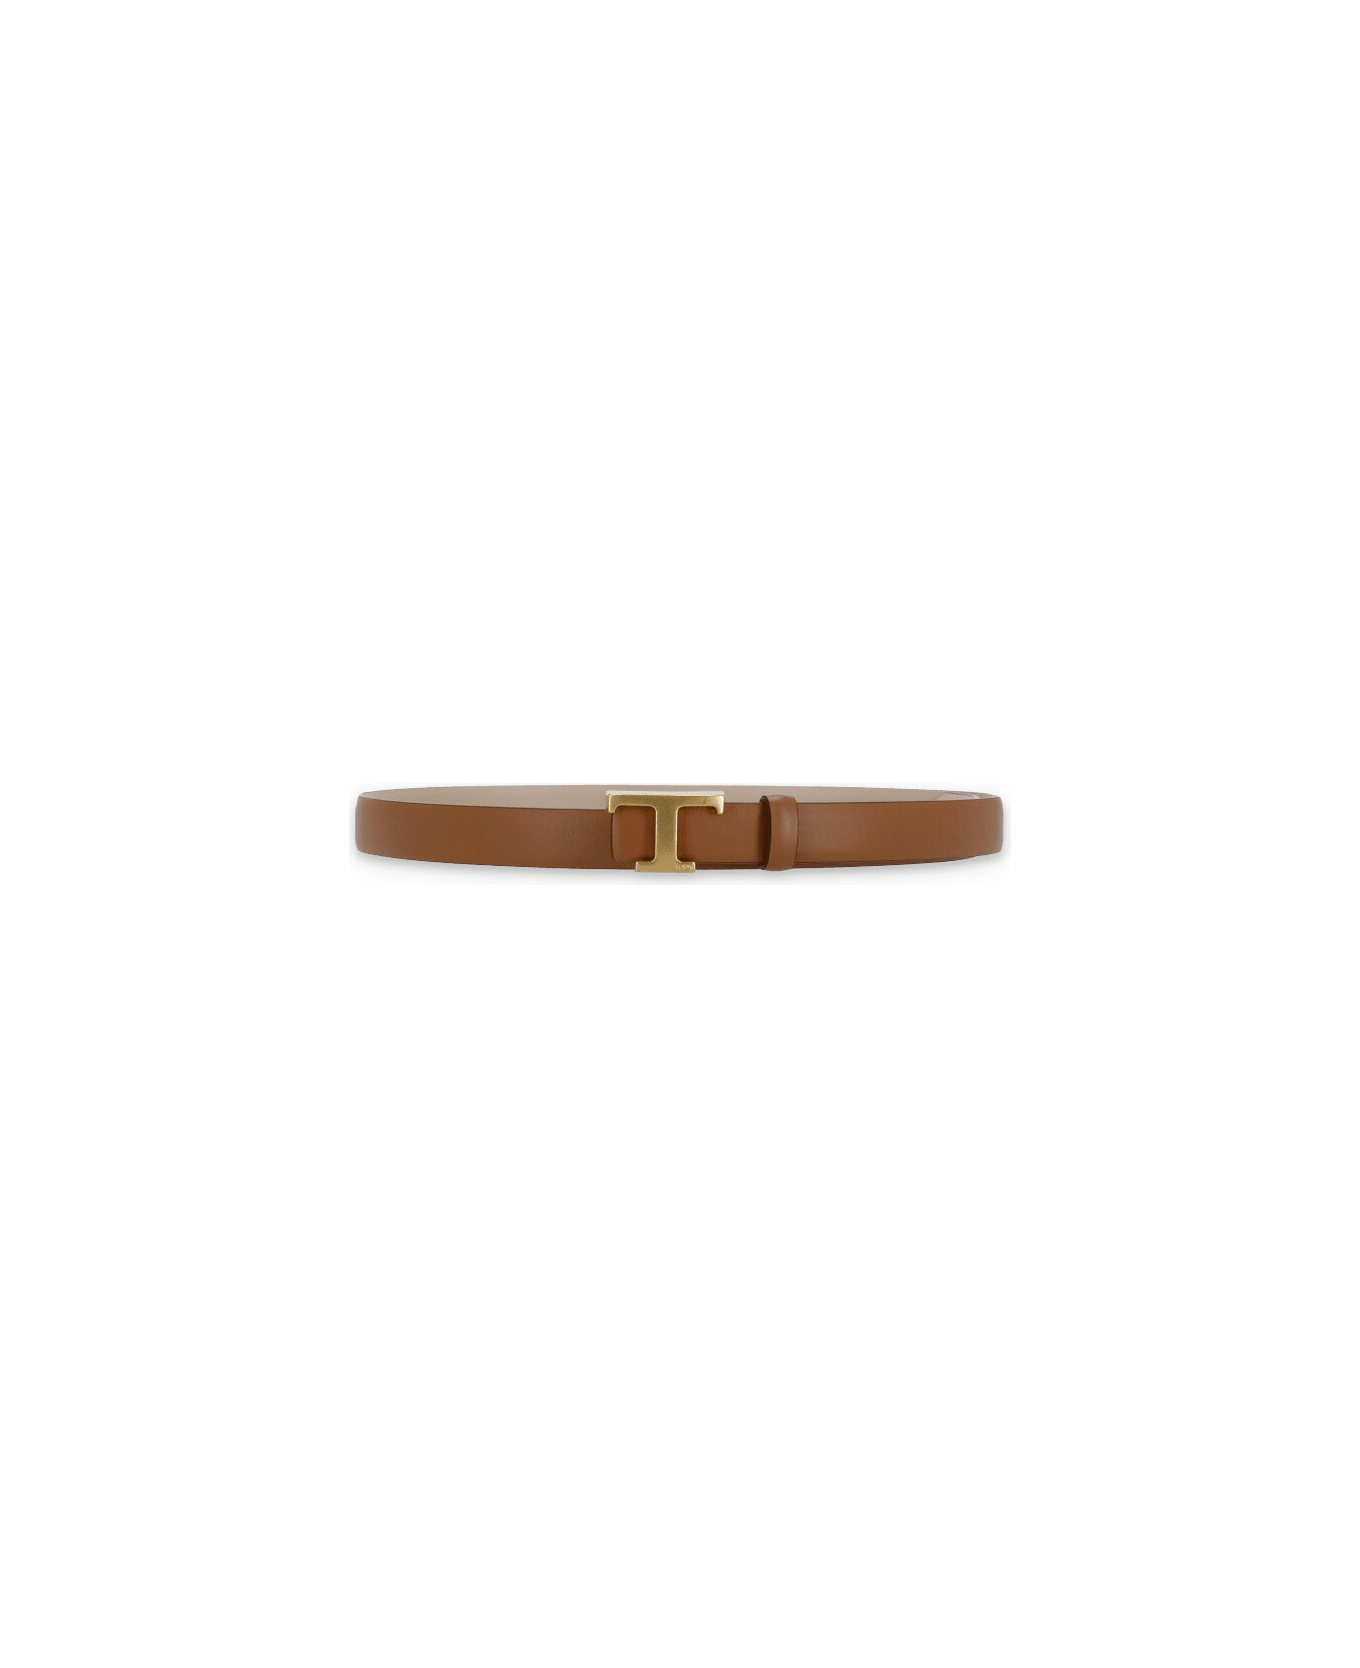 Tod's Reversible Leather Belt - Brown